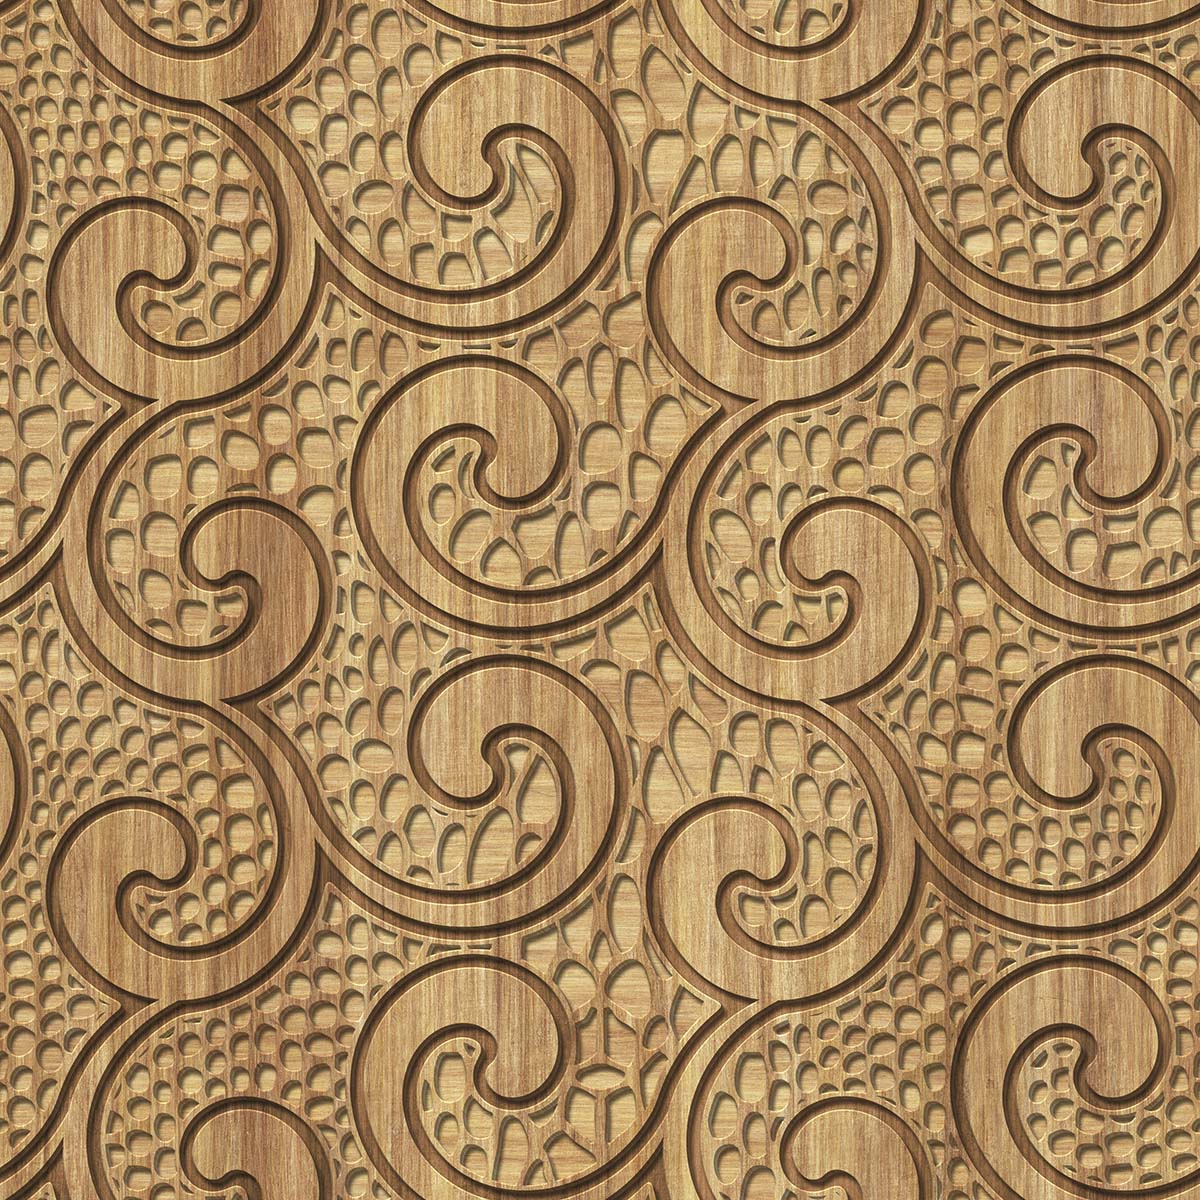 A wood carving with swirls